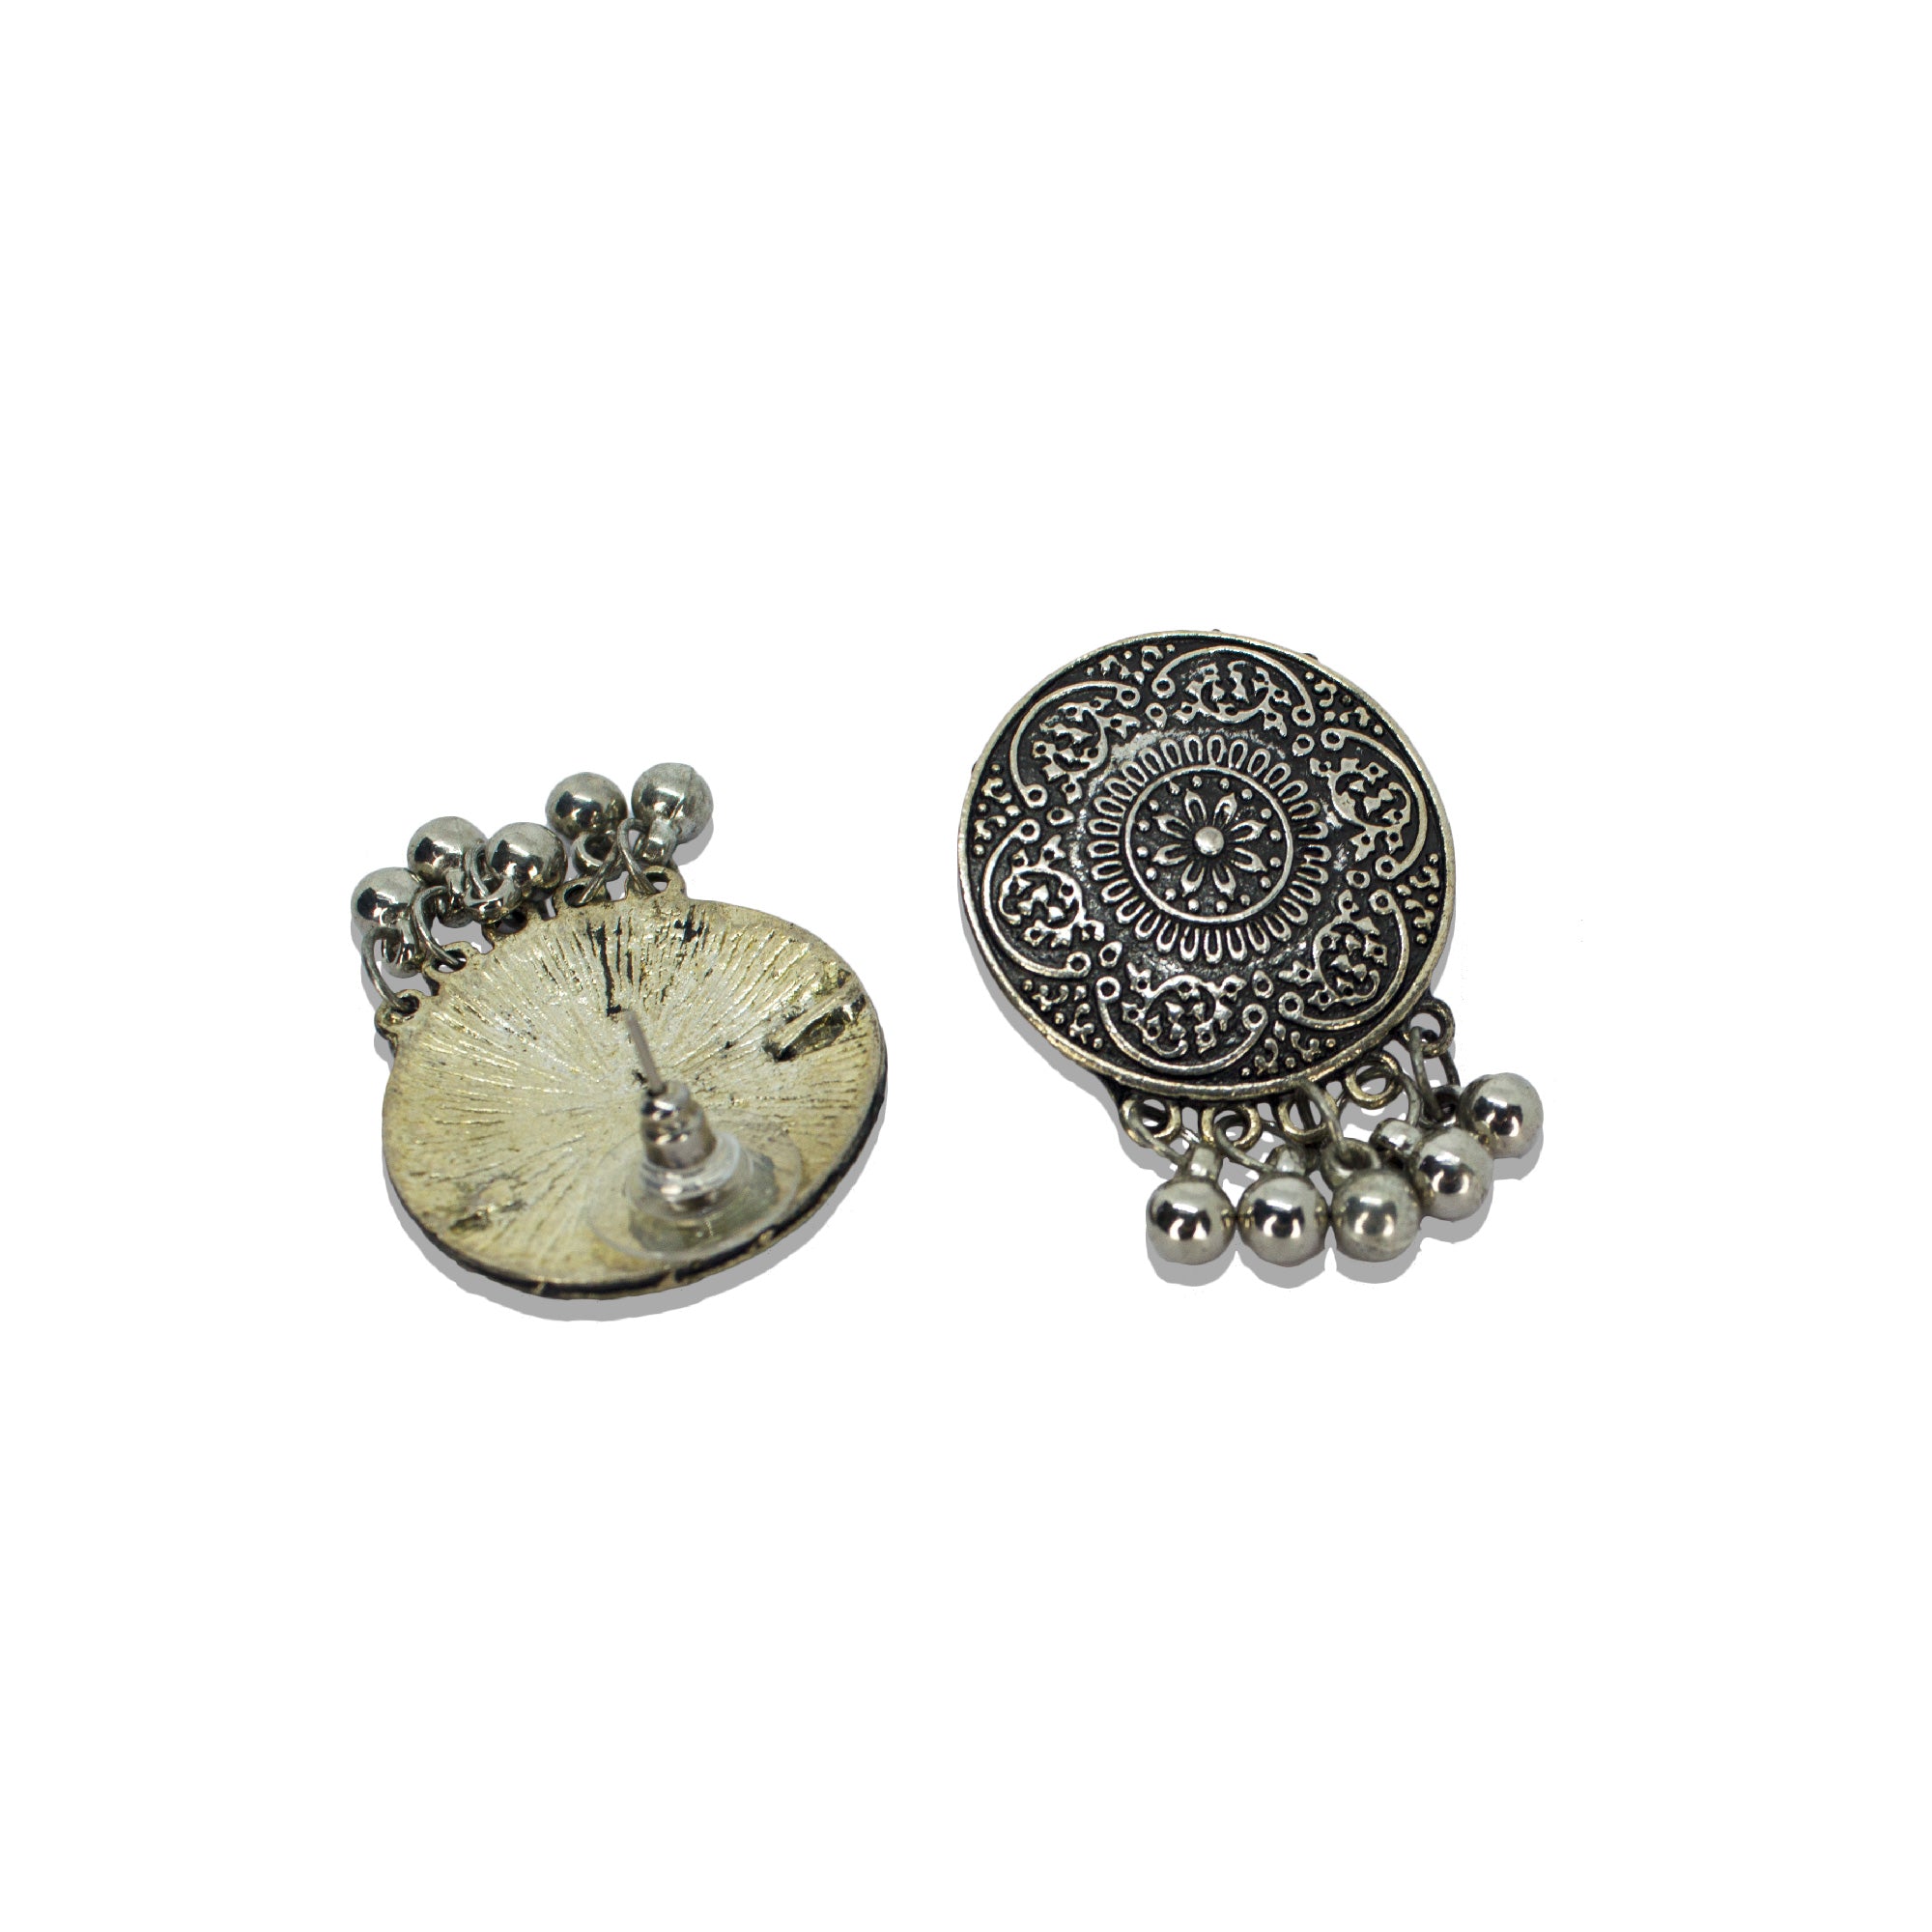 Floral Design Silver Oxidised Studs Earrings With Silver Beads